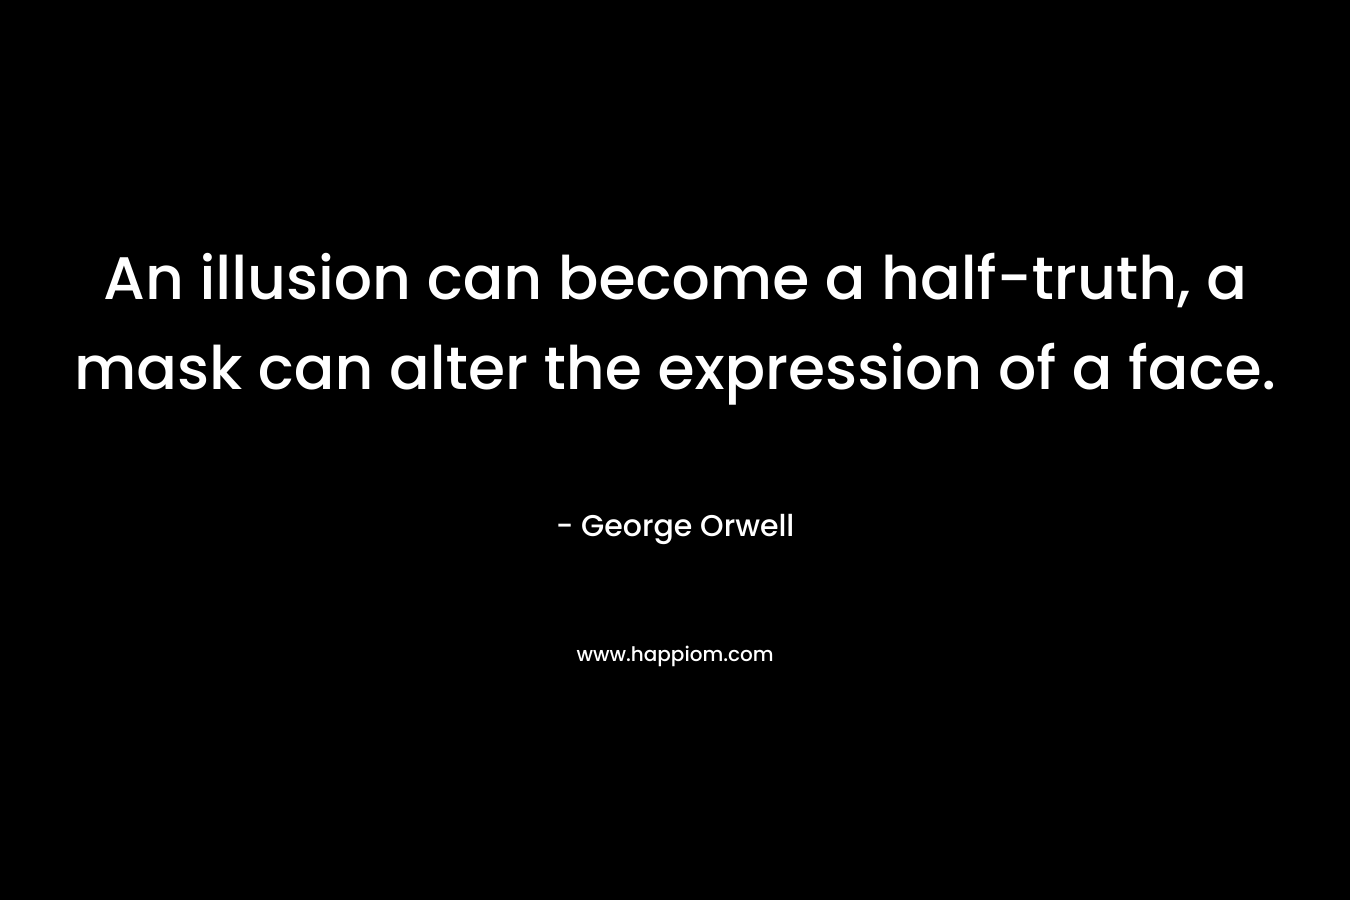 An illusion can become a half-truth, a mask can alter the expression of a face.